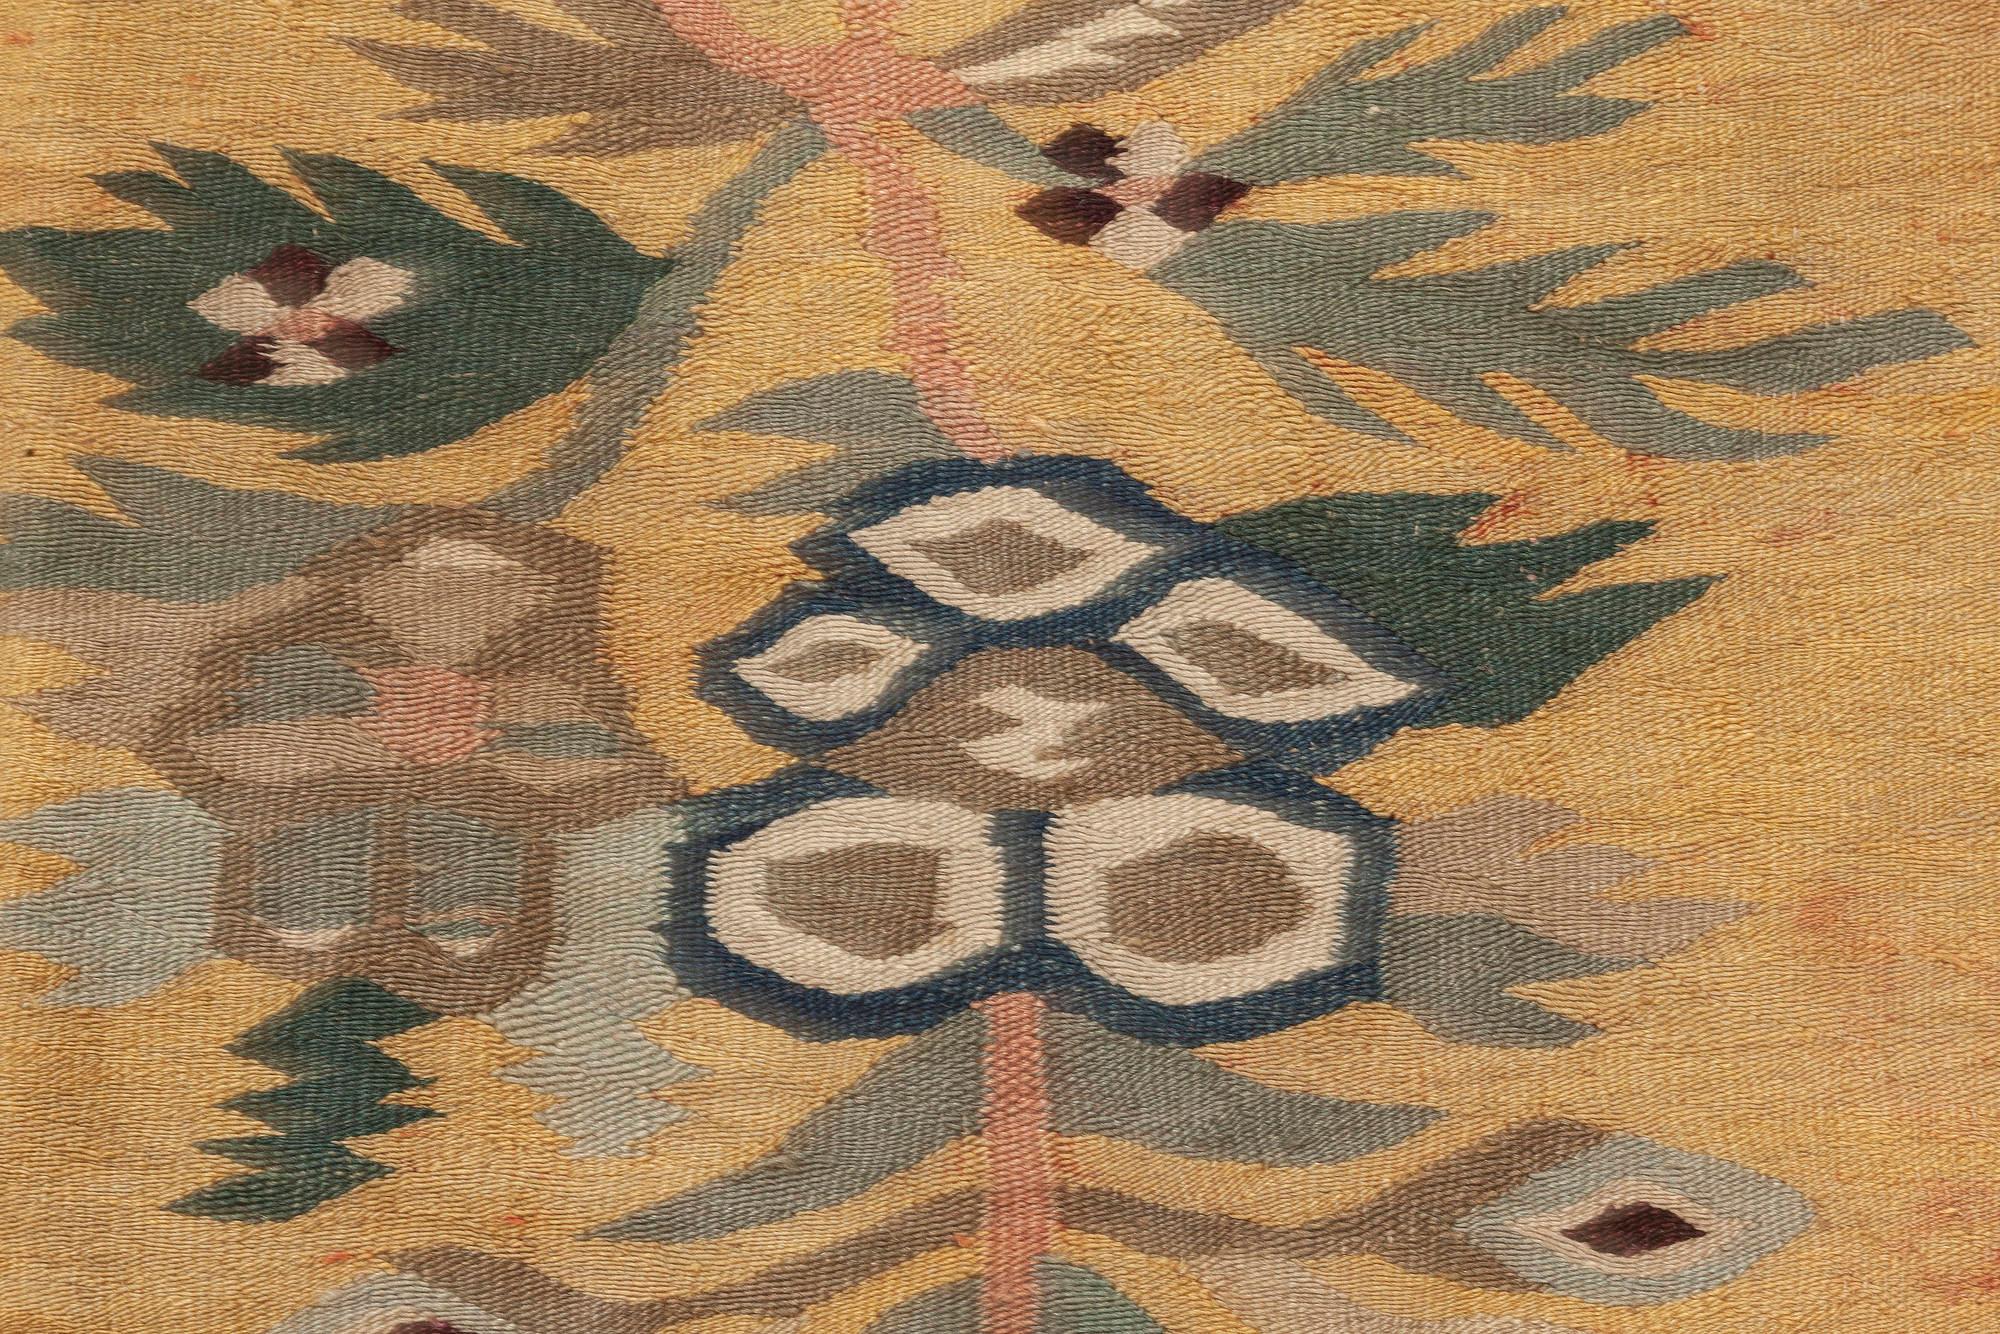 Early 20th century Bessarabian floral brown, green, pink and yellow rug
Size: 5'10